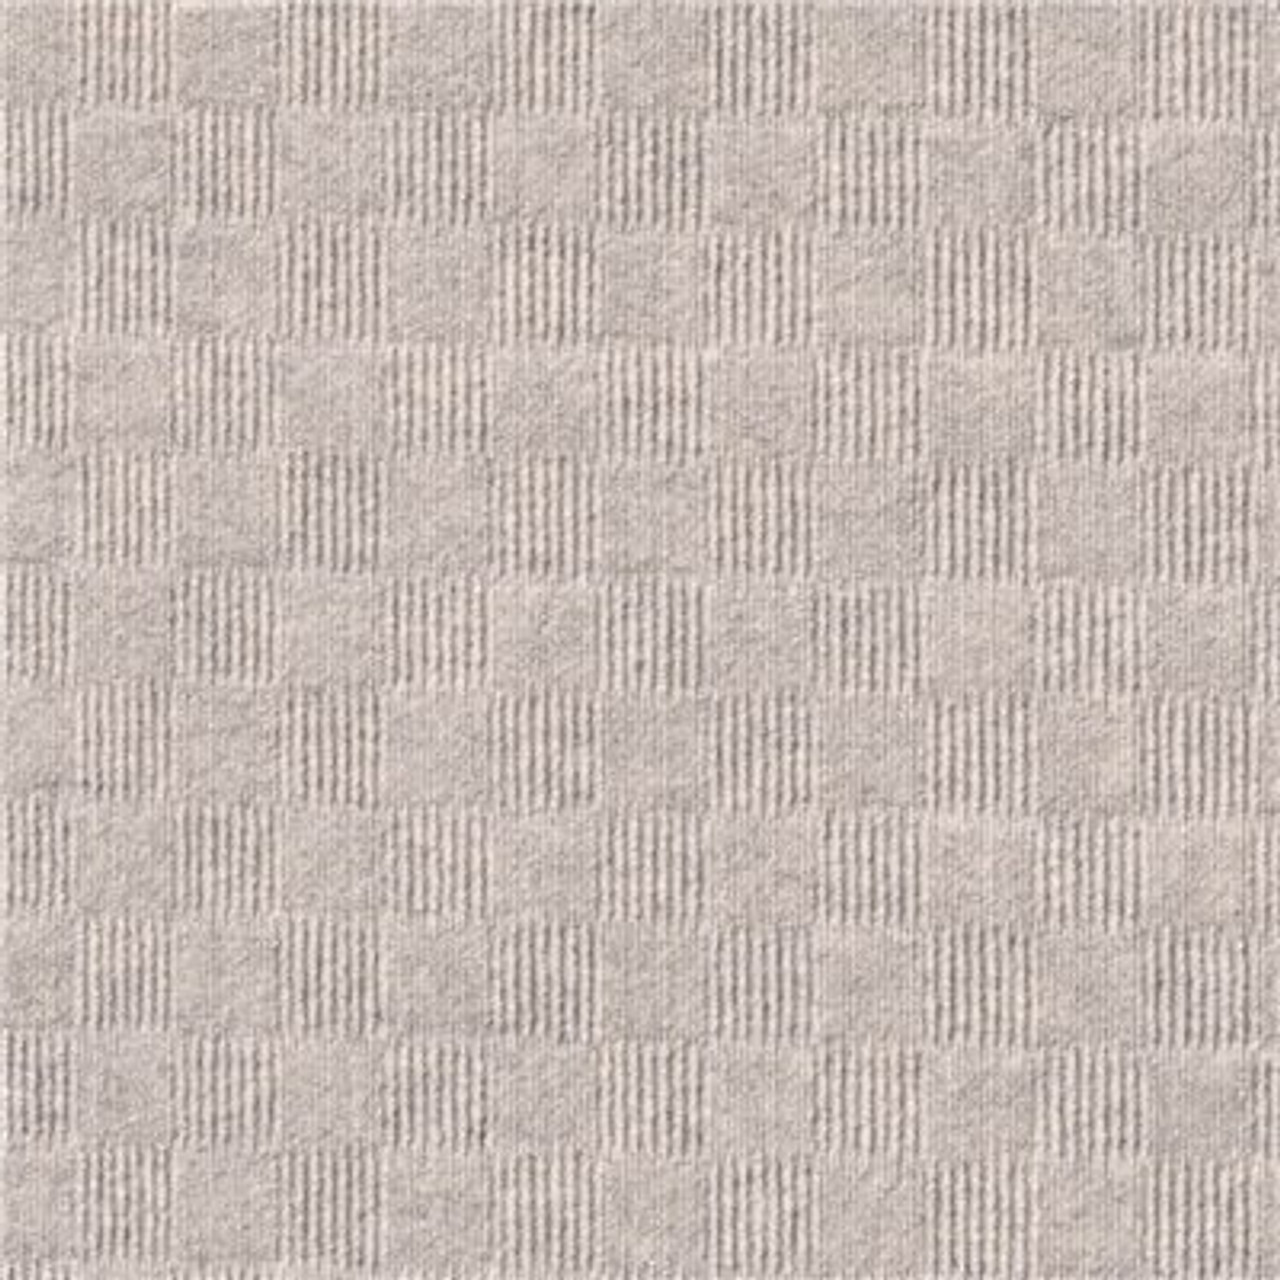 Foss First Impressions City Block Oatmeal 24 In. X 24 In. Commercial Peel And Stick Carpet Tile (15-Tile / Case)